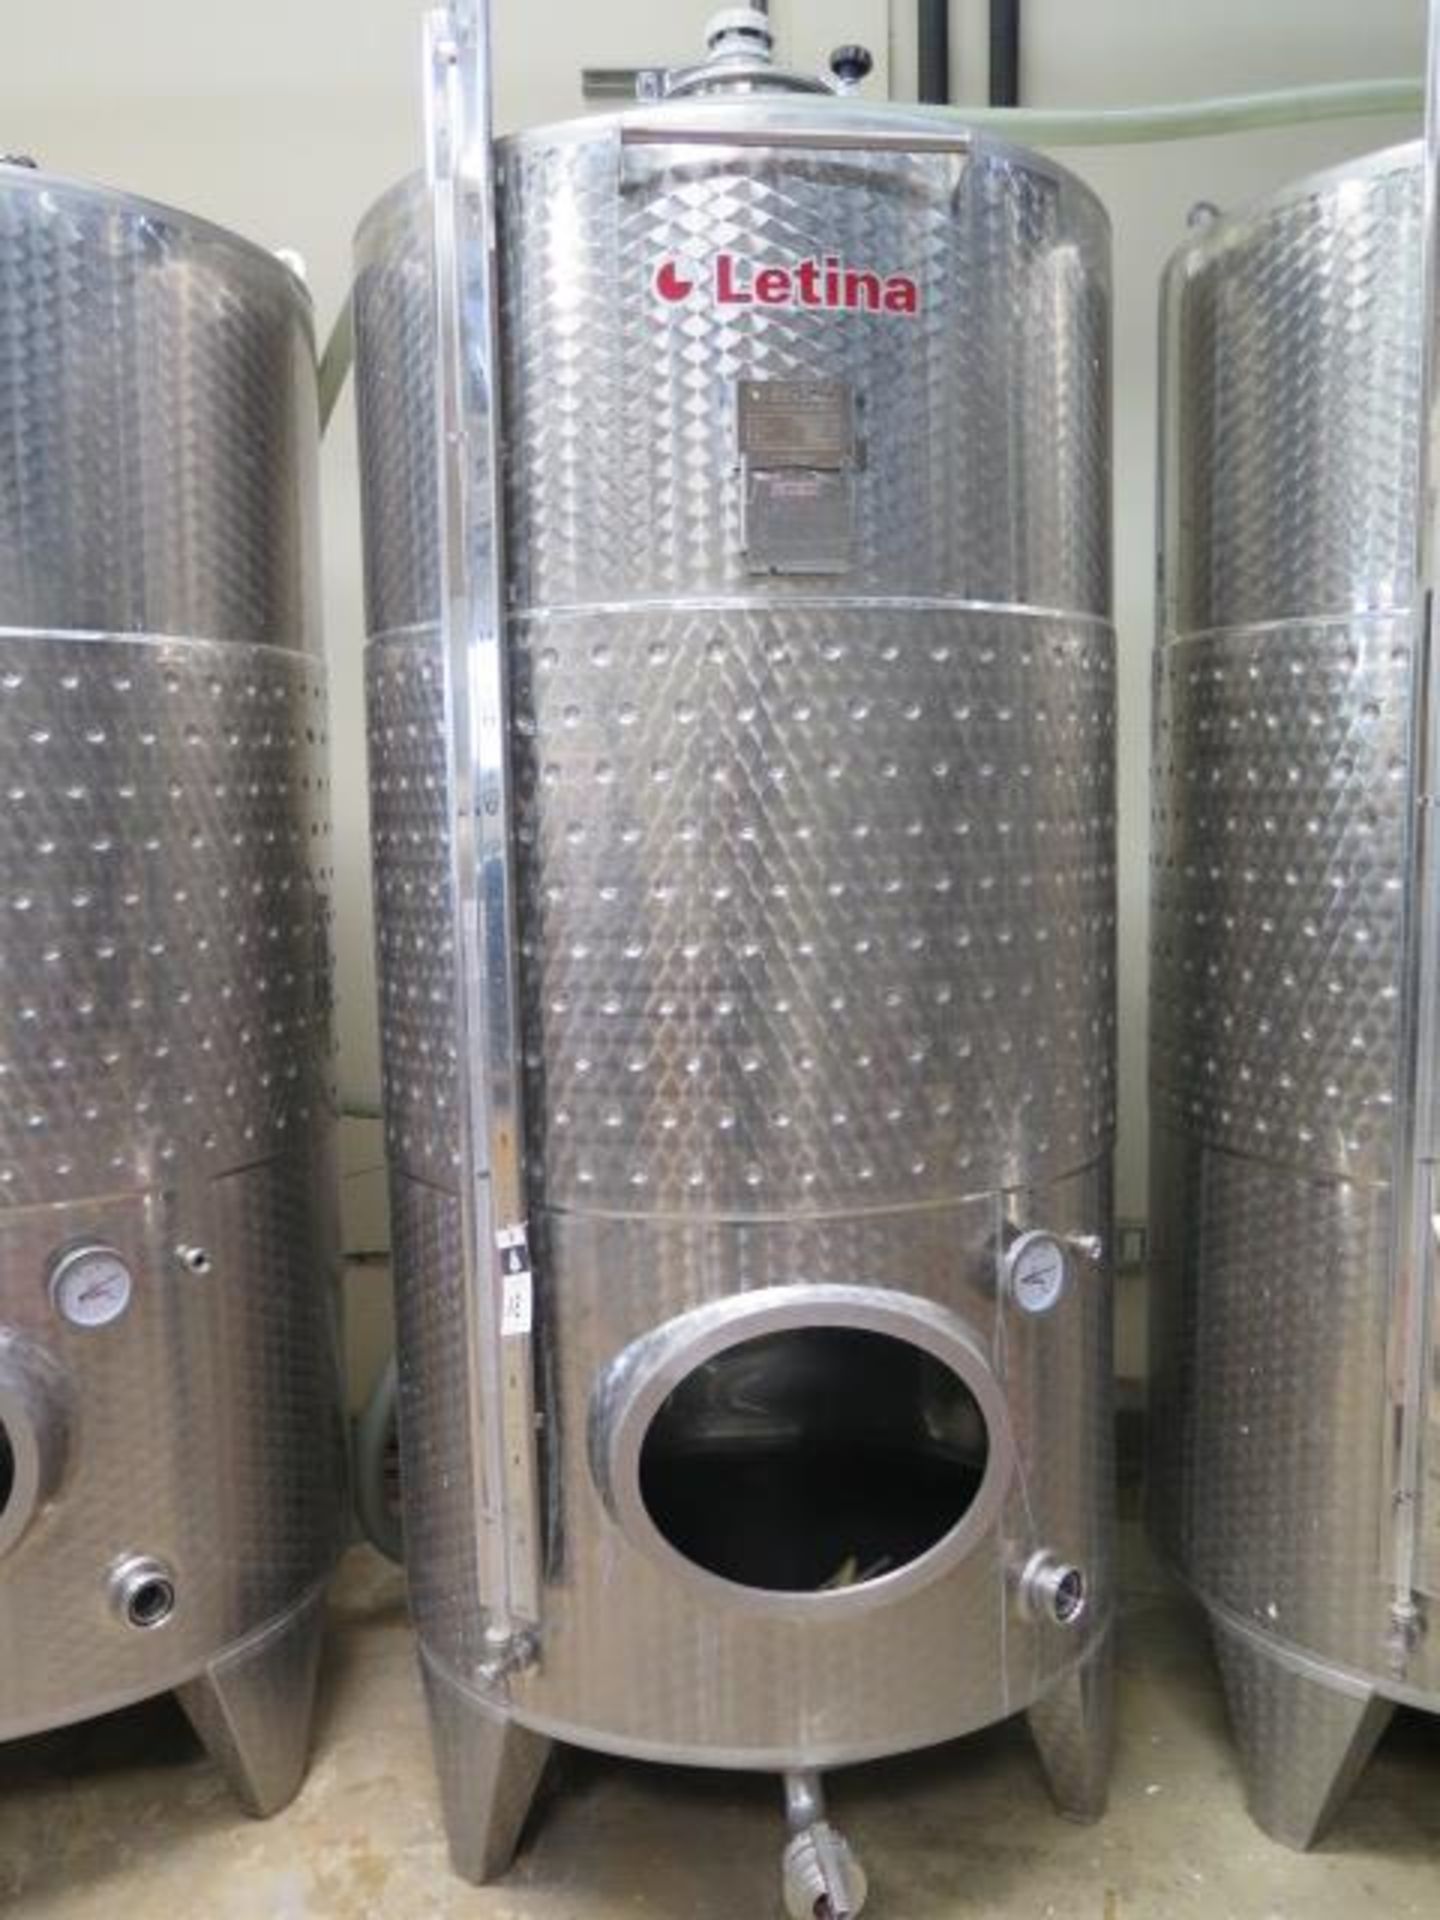 2014 Letina type Z2000HV11 2000 Liter Jacketed Closed Storage Tanks s/n 051014/2 (SOLD AS-IS - NO